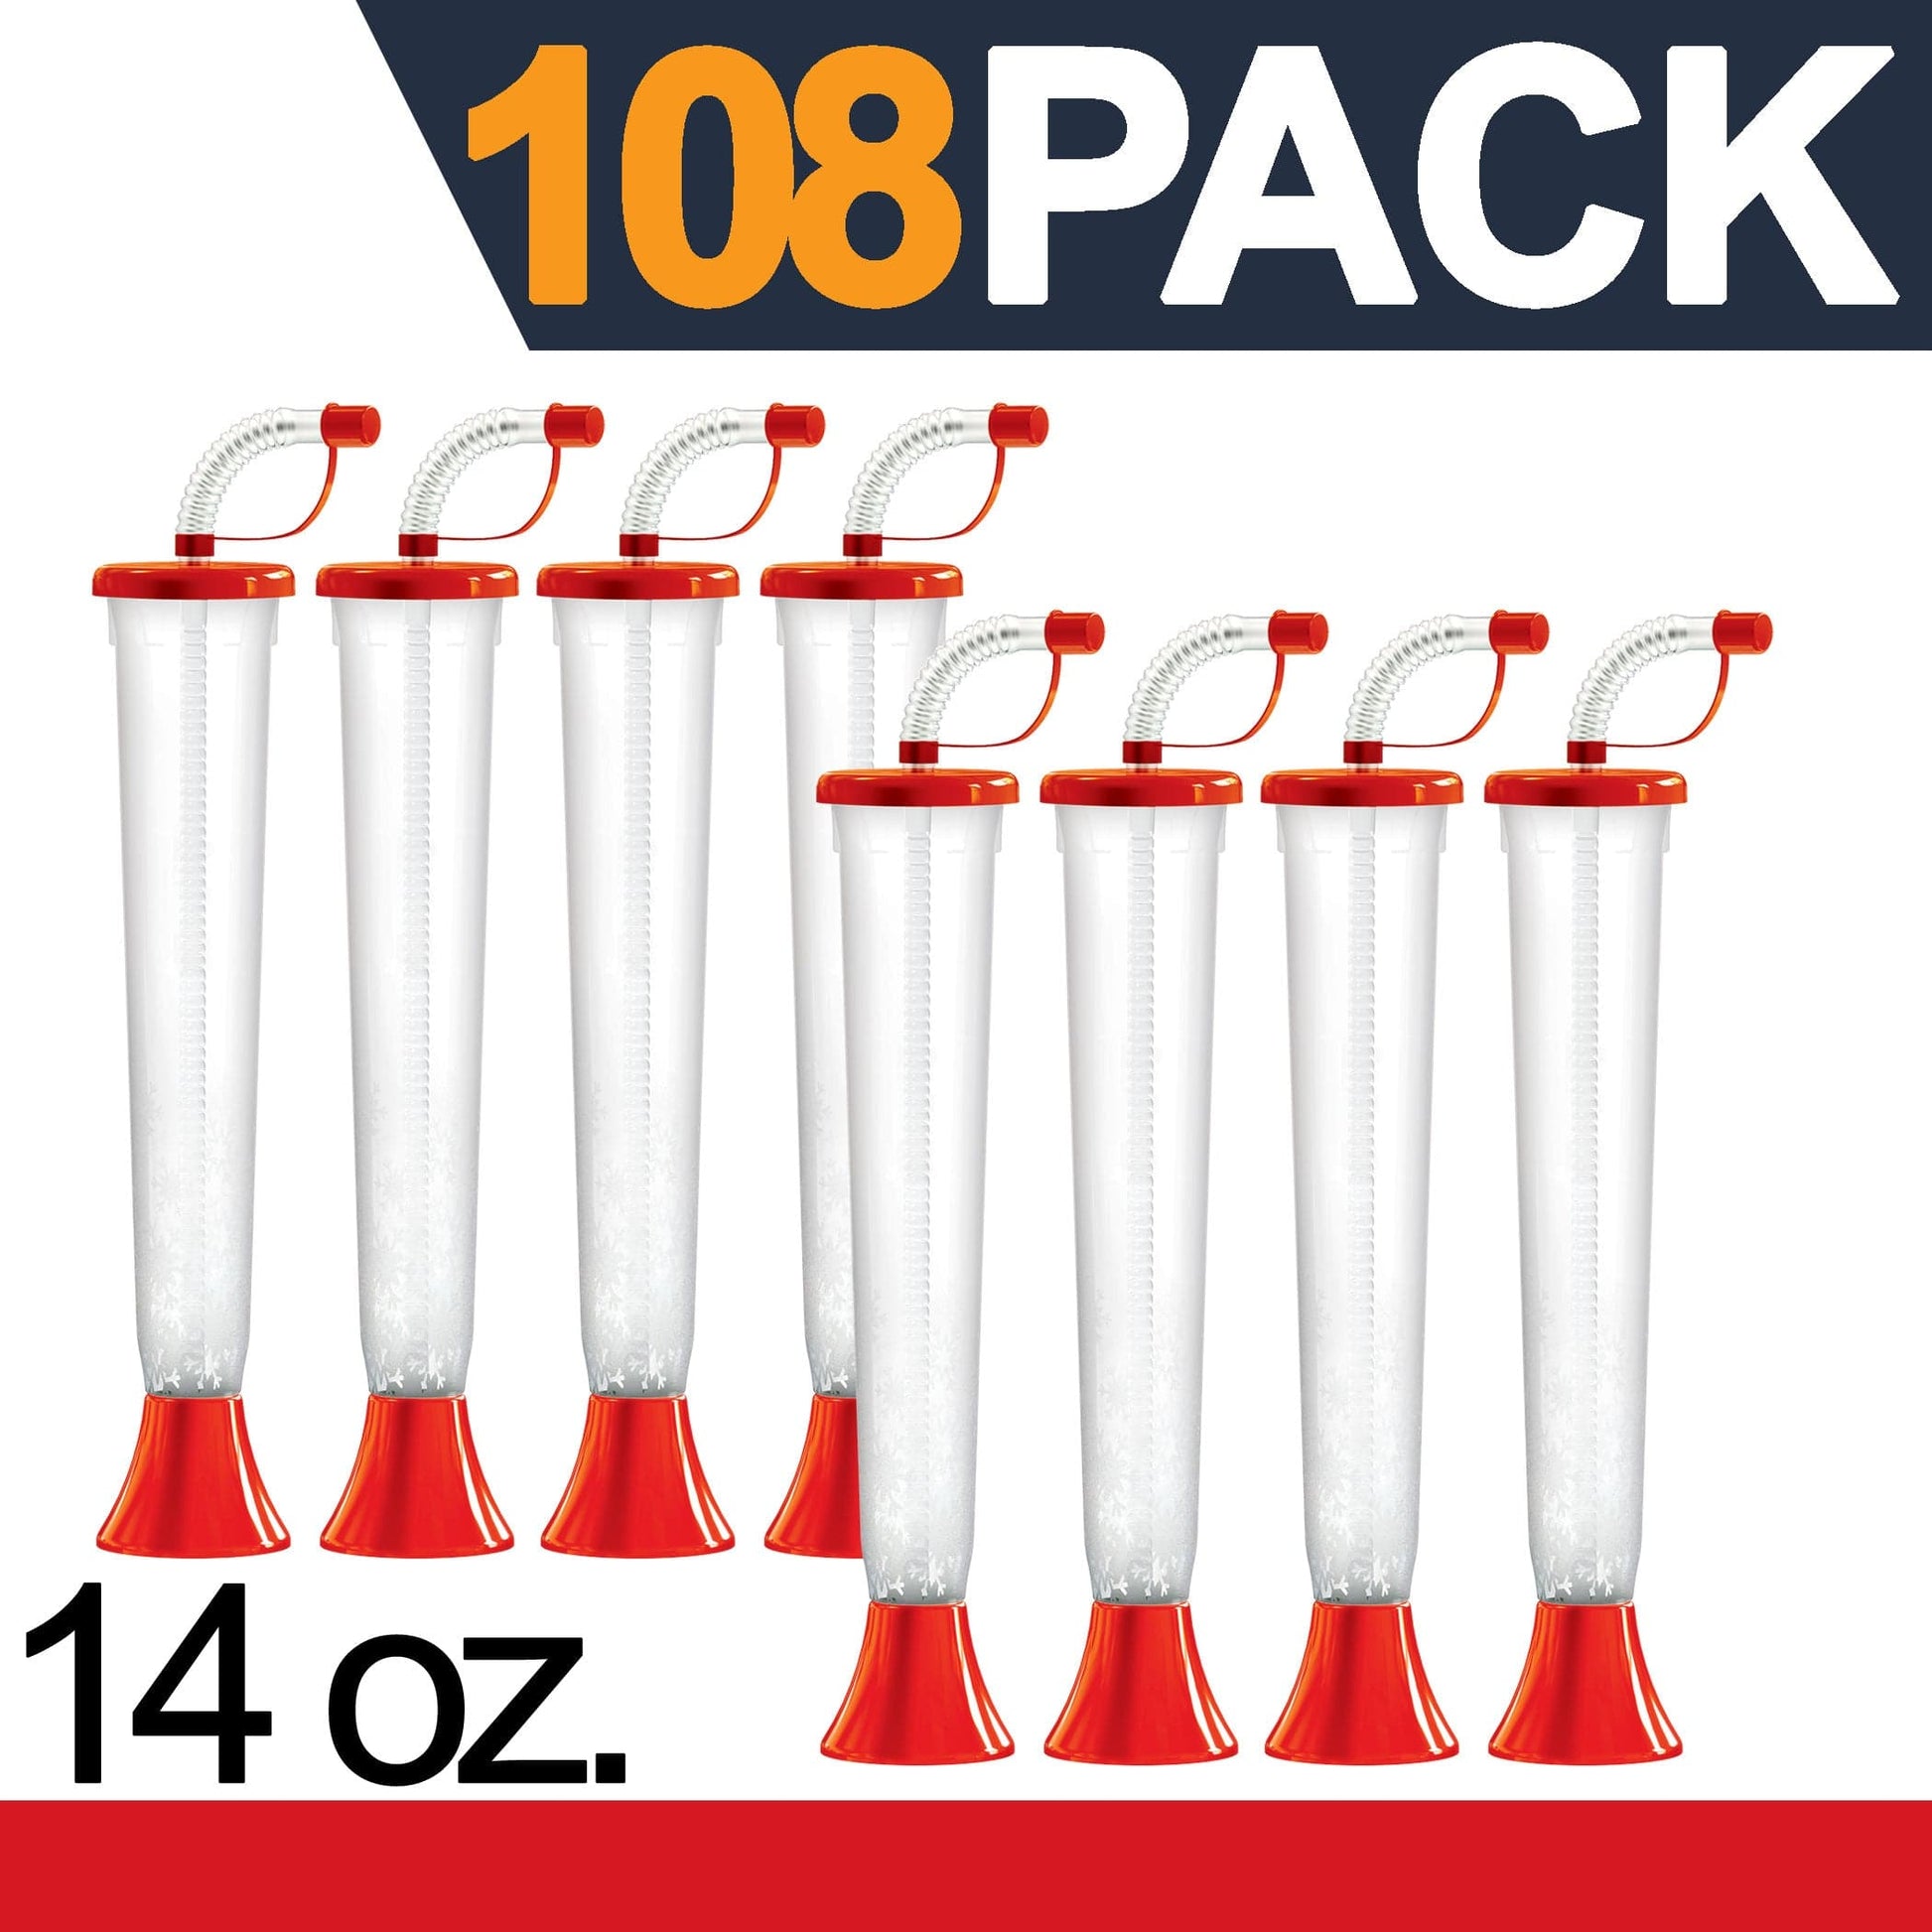 (54 or 108 Cups) Yard Cups with Red Lids and Straws - 14oz - for Margaritas, Cold Drinks, Frozen Drinks, Kids Party